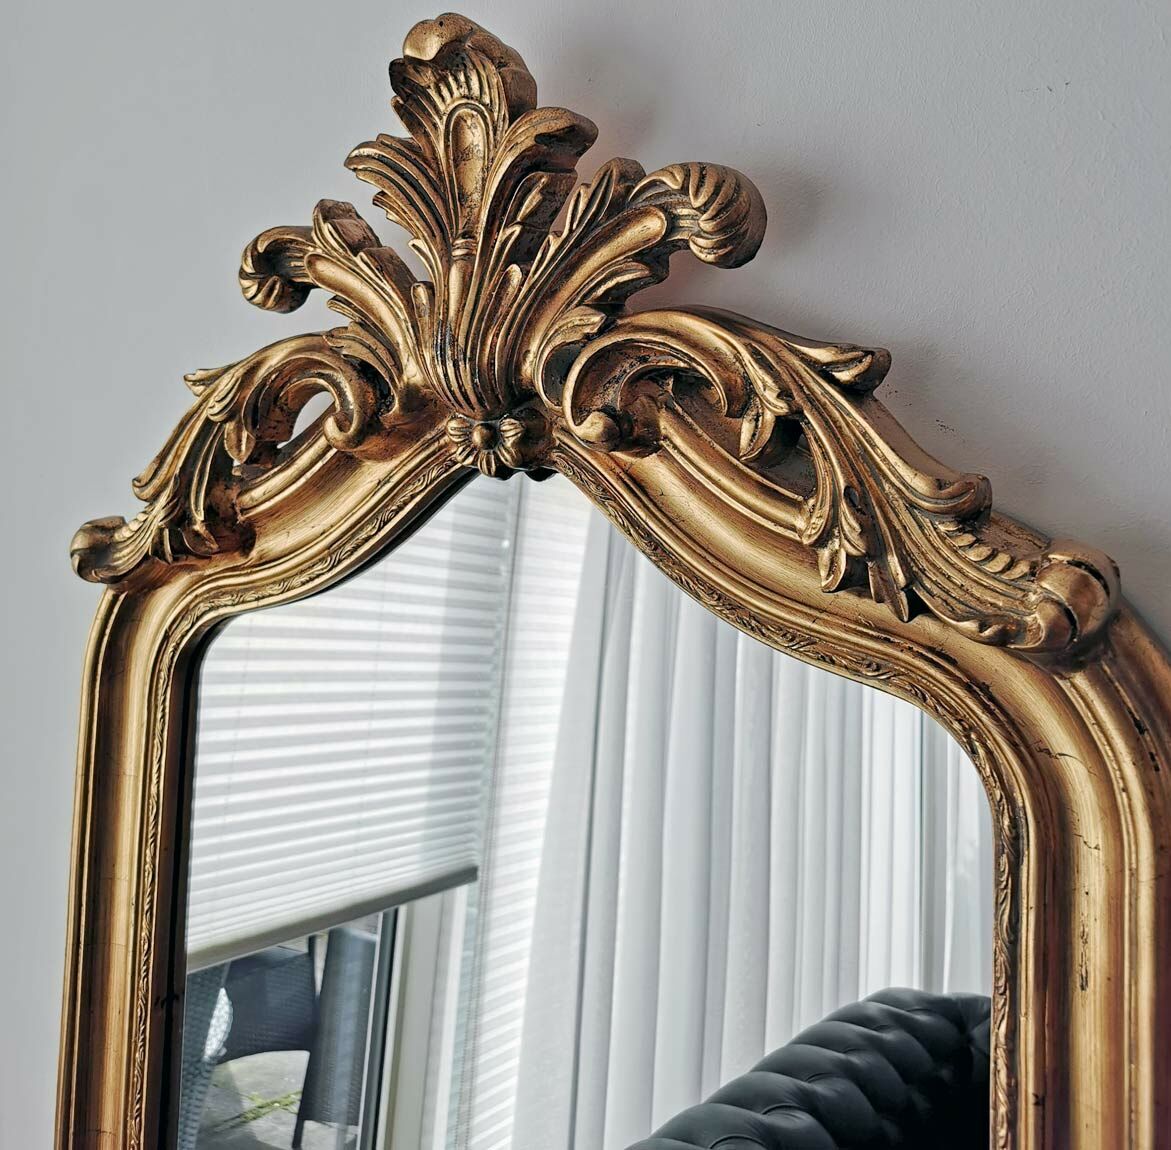 Gold Louis Philippe mirror with a cartouch. - Crown and Colony Antiques in  Fairhope, AL